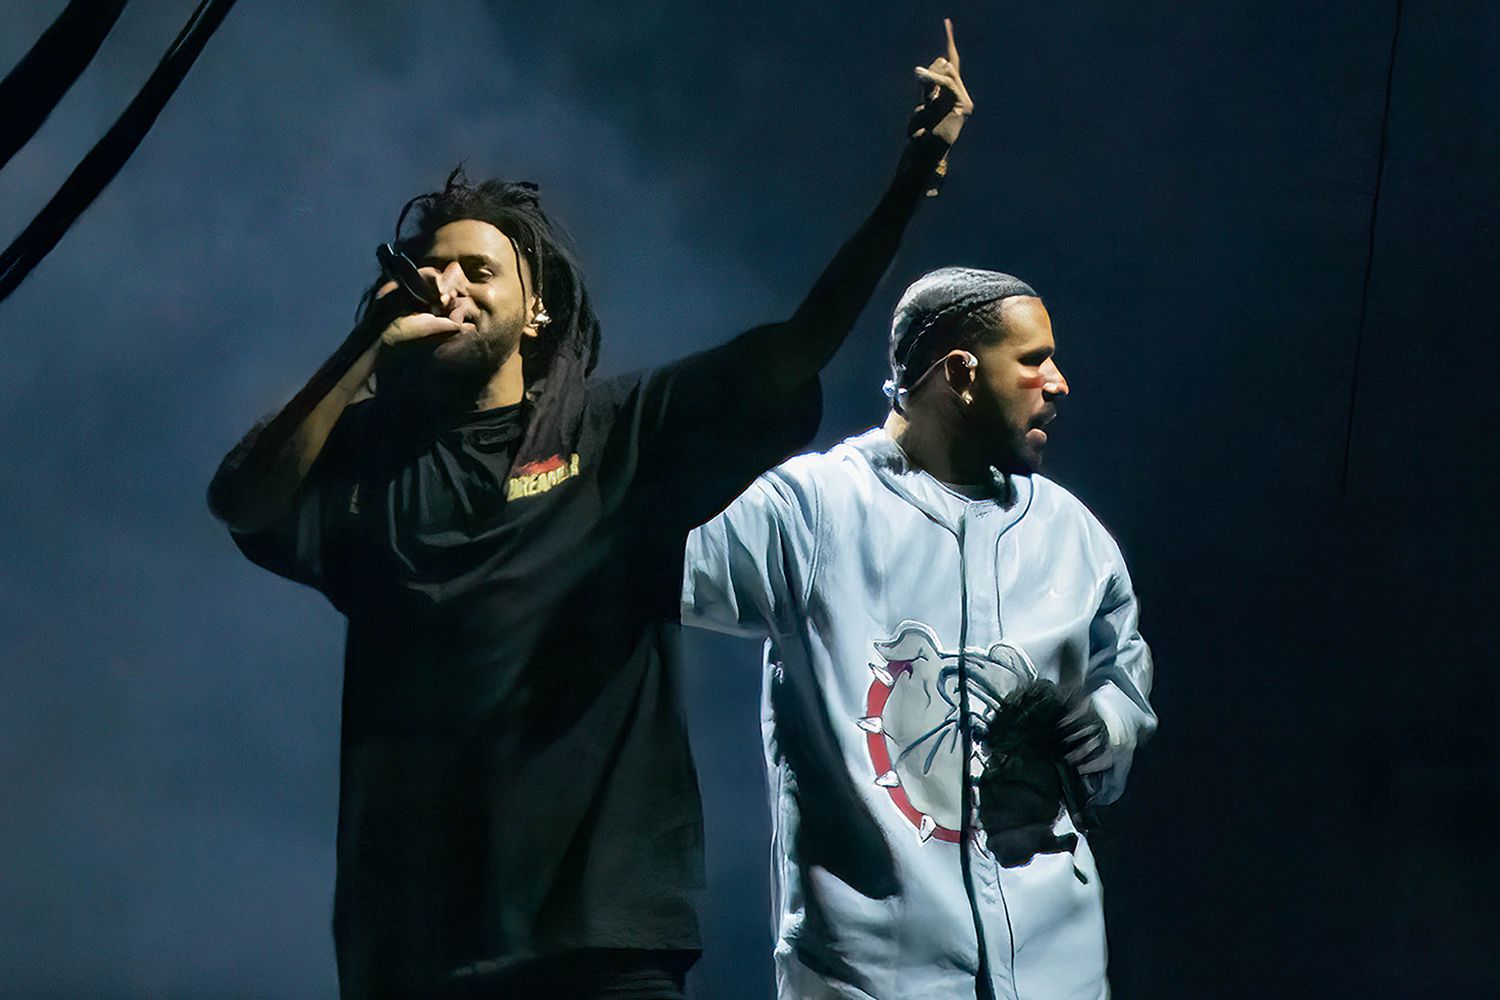 New Drake And J. Cole Tour Extension Announced: “It’s All A Blur” Tour